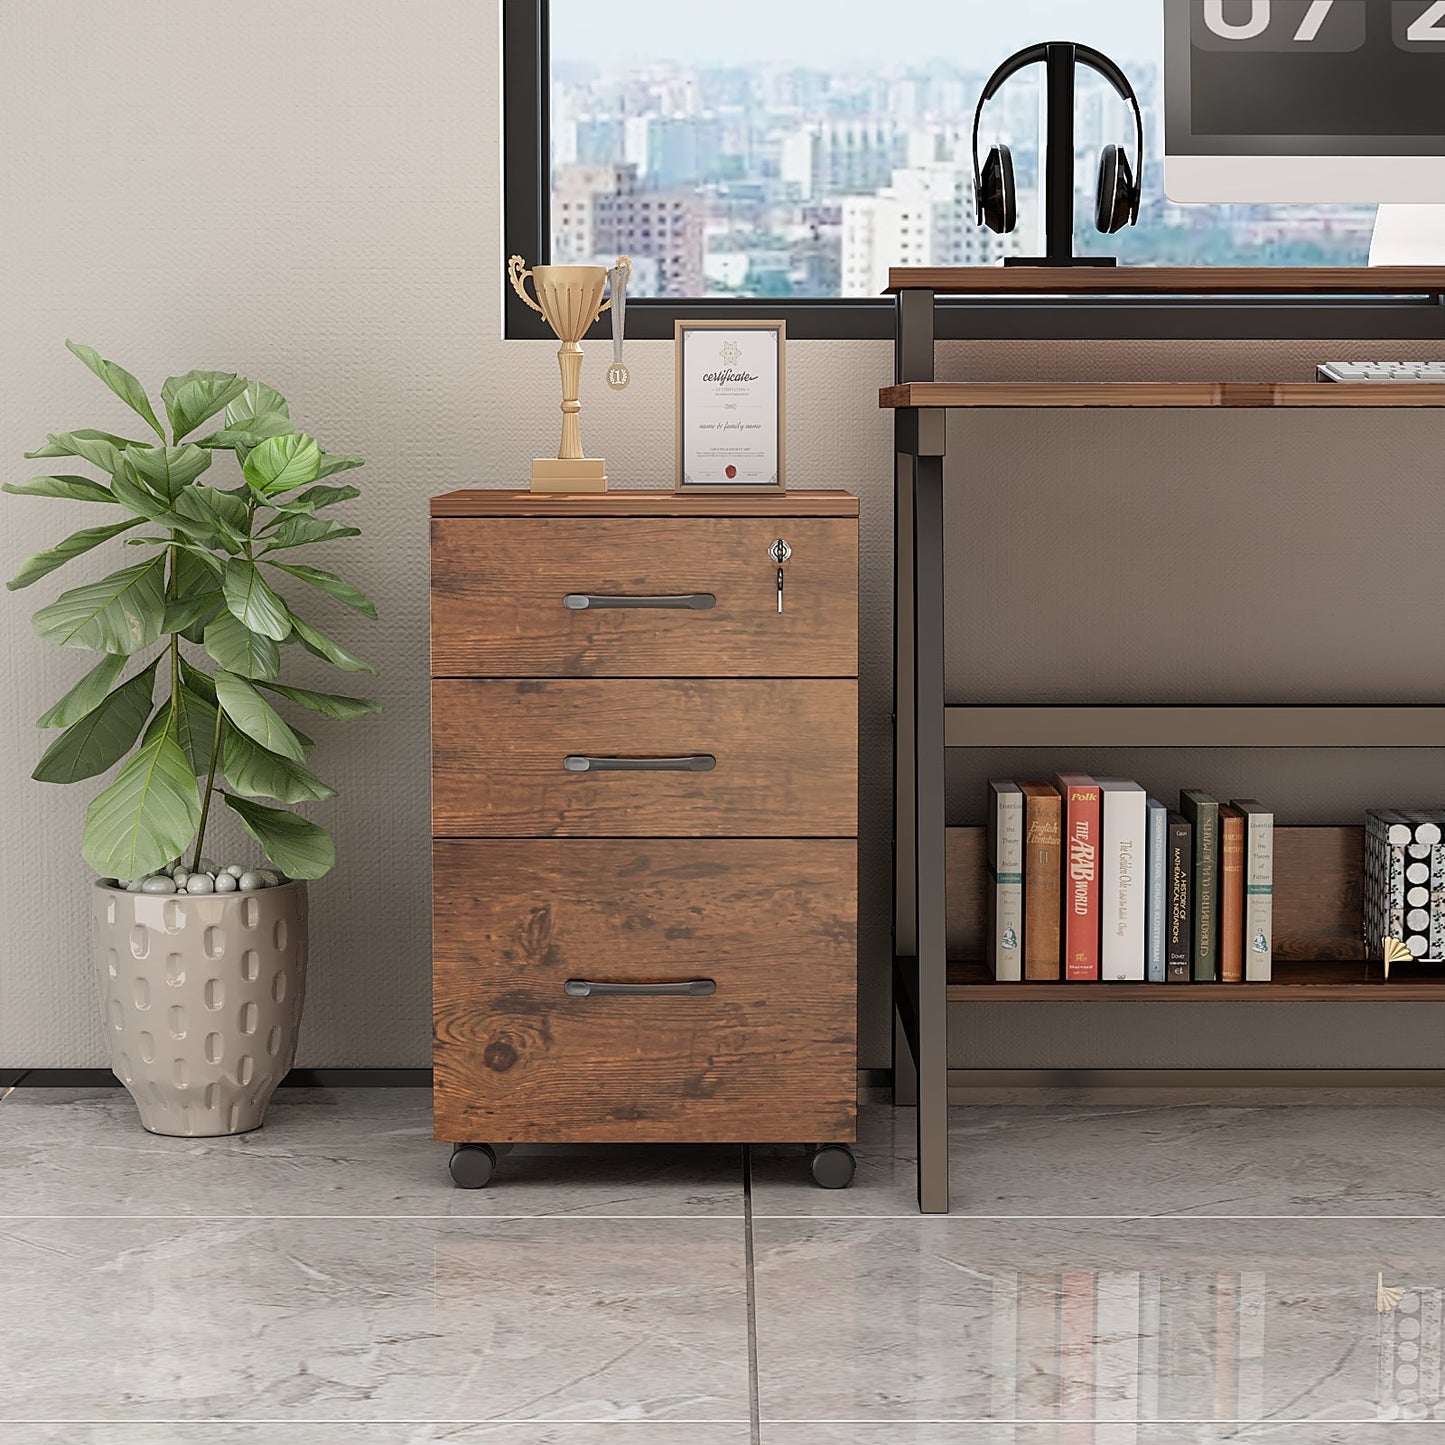 3 Drawers Wooden Locking File Cabinet with Storage